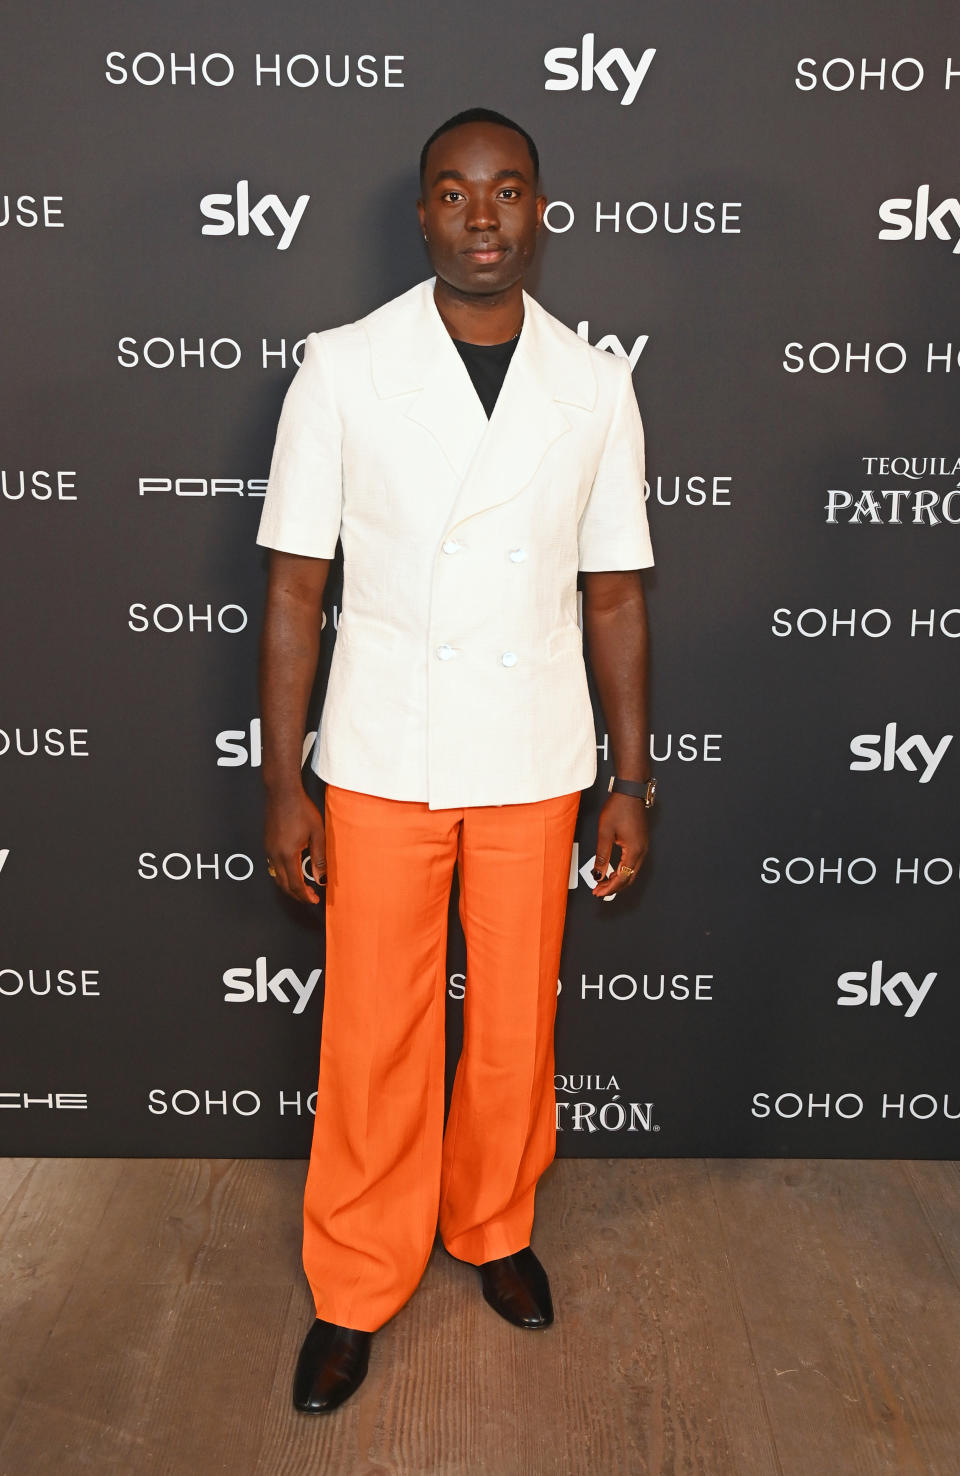 LONDON, ENGLAND - SEPTEMBER 01: Paapa Essiedu attends the inaugural Soho House Awards, championing emerging talent in the creative industries, at 180 The Strand on September 1, 2022 in London, England. 

Pic Credit: Dave Benett